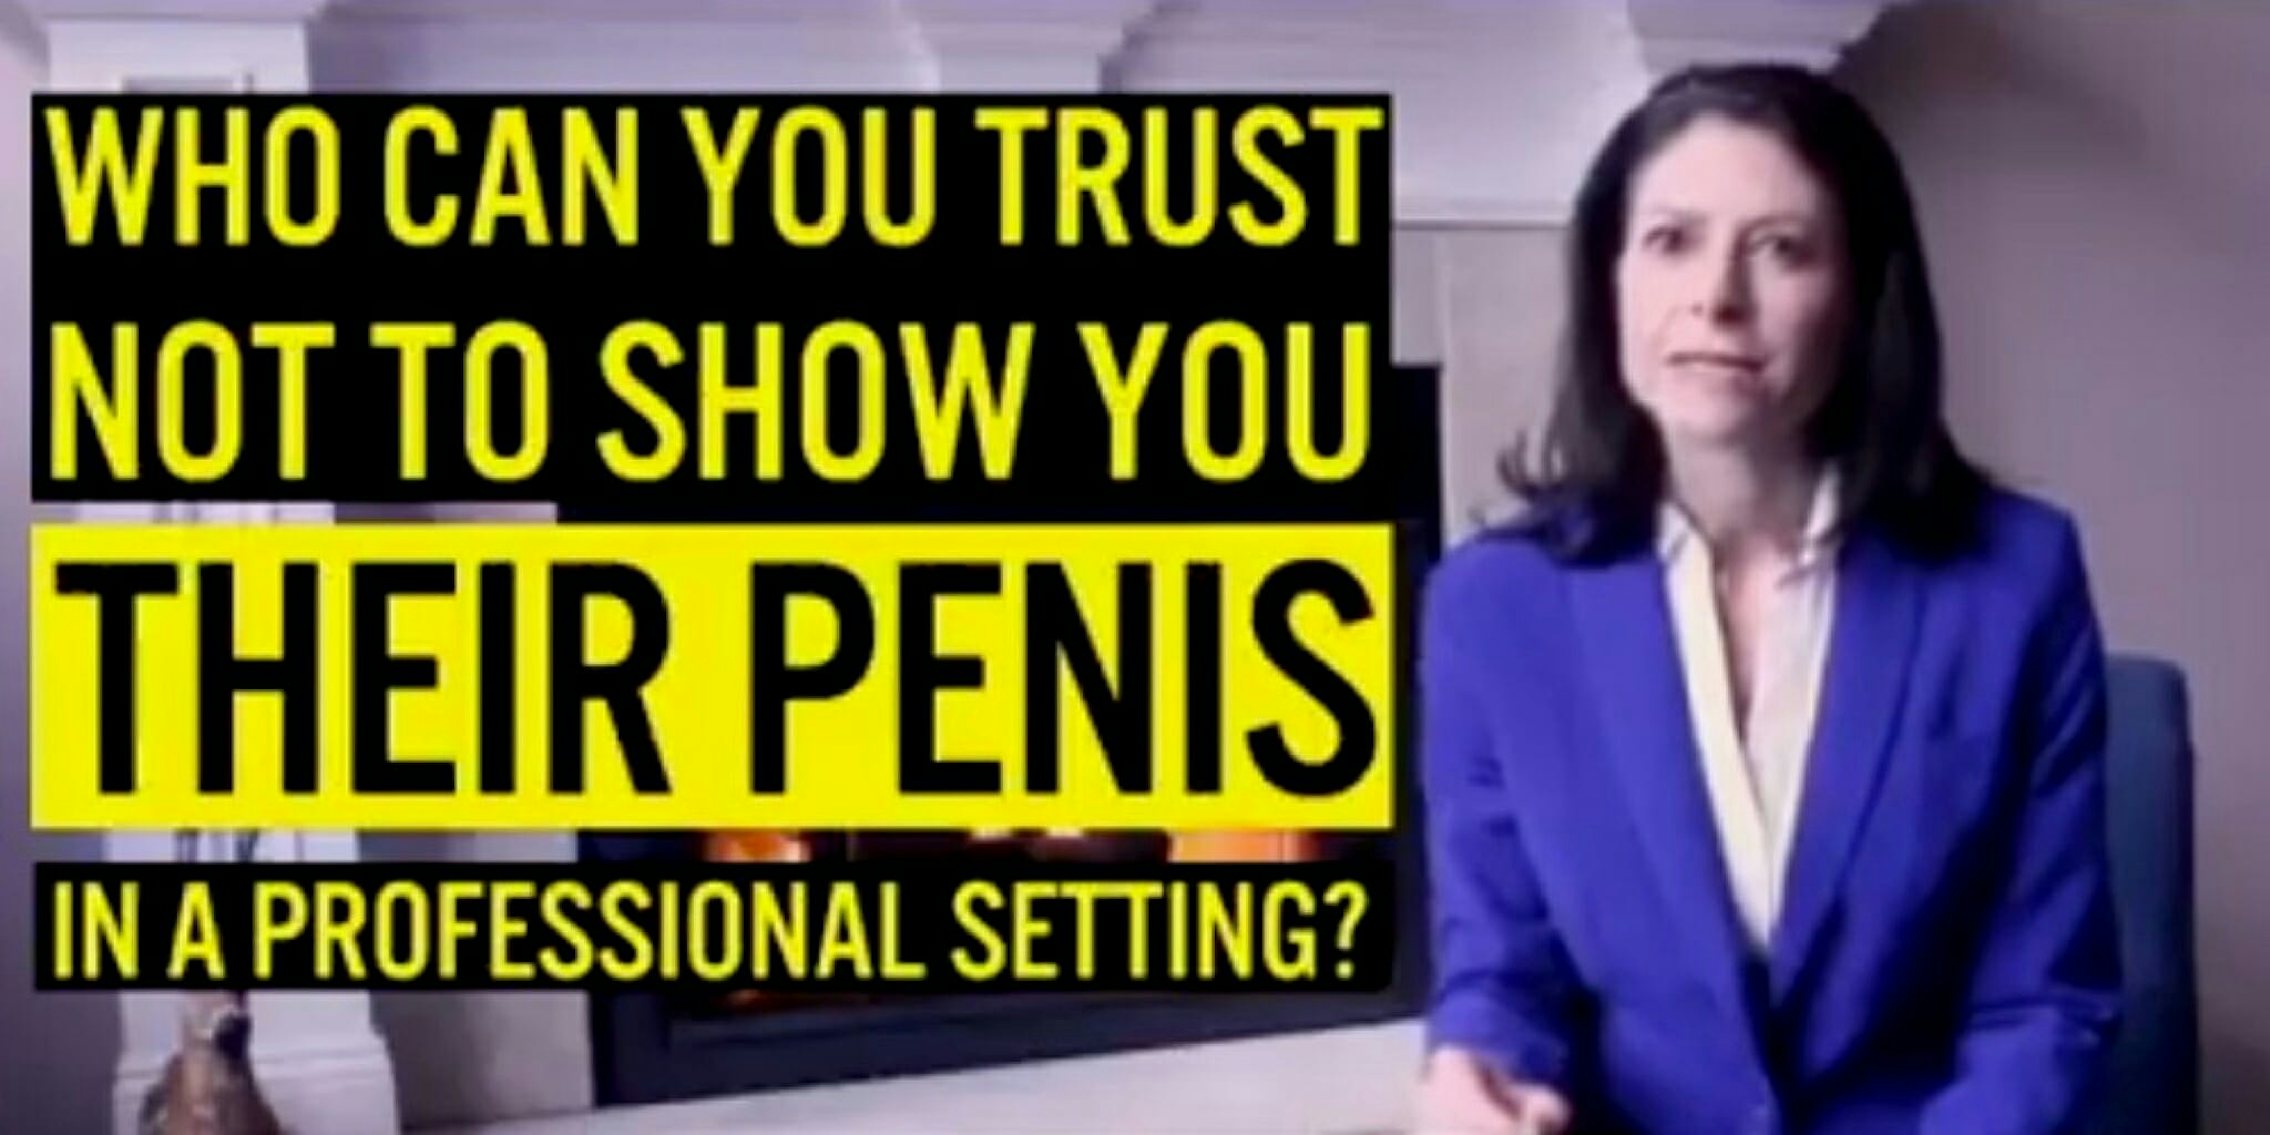 Michigan Attorney General candidate Dana Nessel drags male politicians who have sexually harassed women in her political ad.